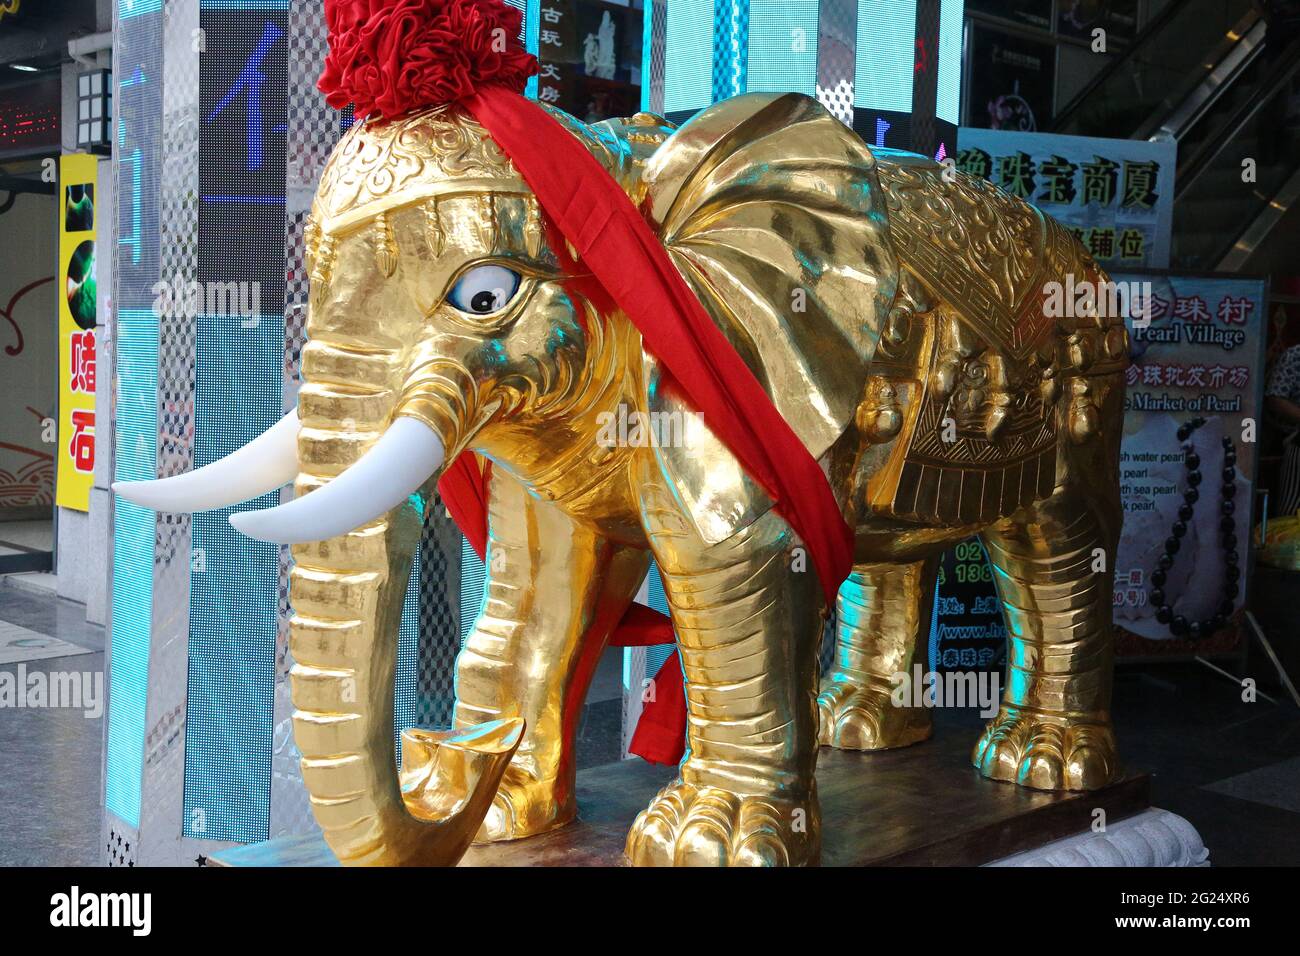 Side view of Elephant Statue in Gold on entry to Pearl Village Market, Shanghai, Peoples Republic of China. Stock Photo